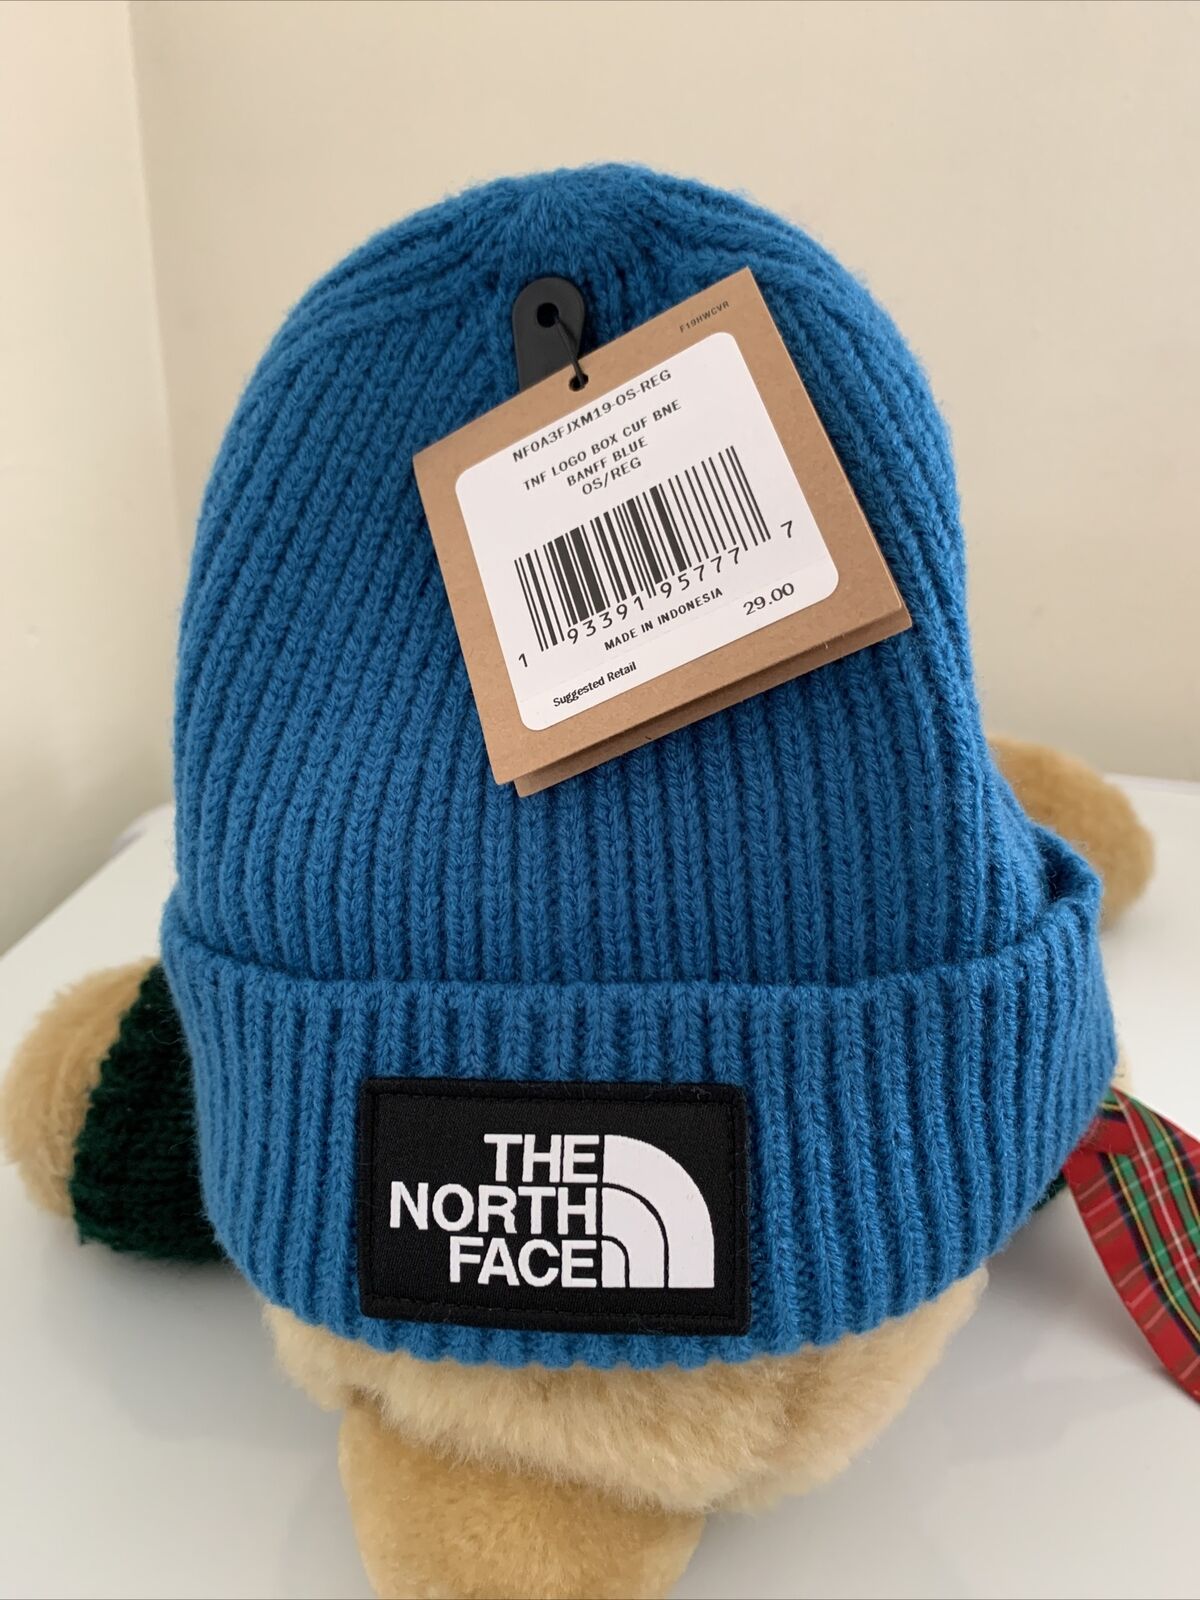 The North Face TNF Logo Box Cuffed Beanie Hat Youth Junior Unisex Blue Size OS The North Face - фотография #8